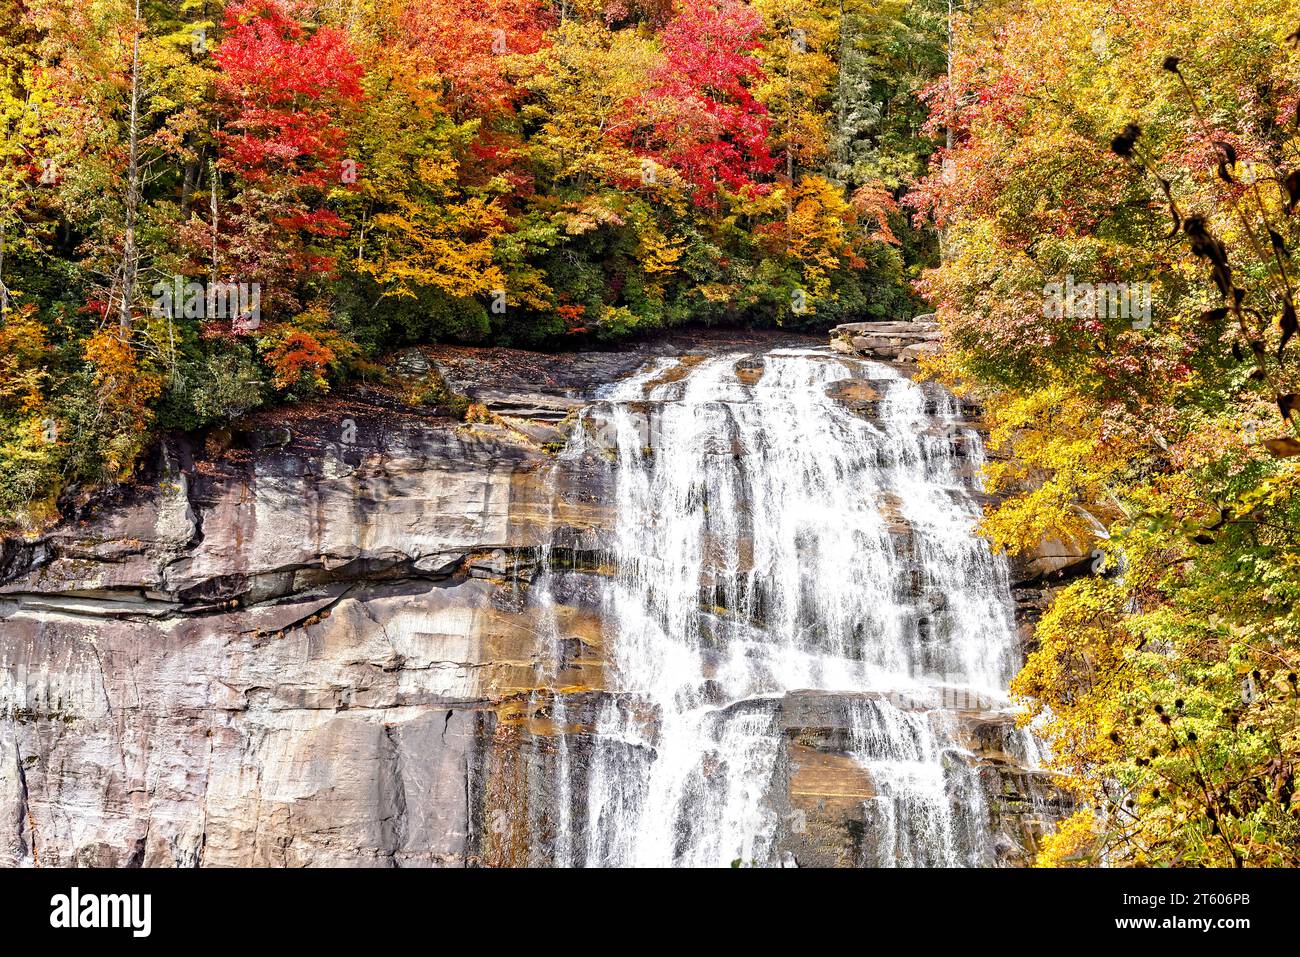 Rainbow Falls in Autumn, a waterfall in Western North Carolina, on the Horsepasture River in Pisgah National Forest. Stock Photo